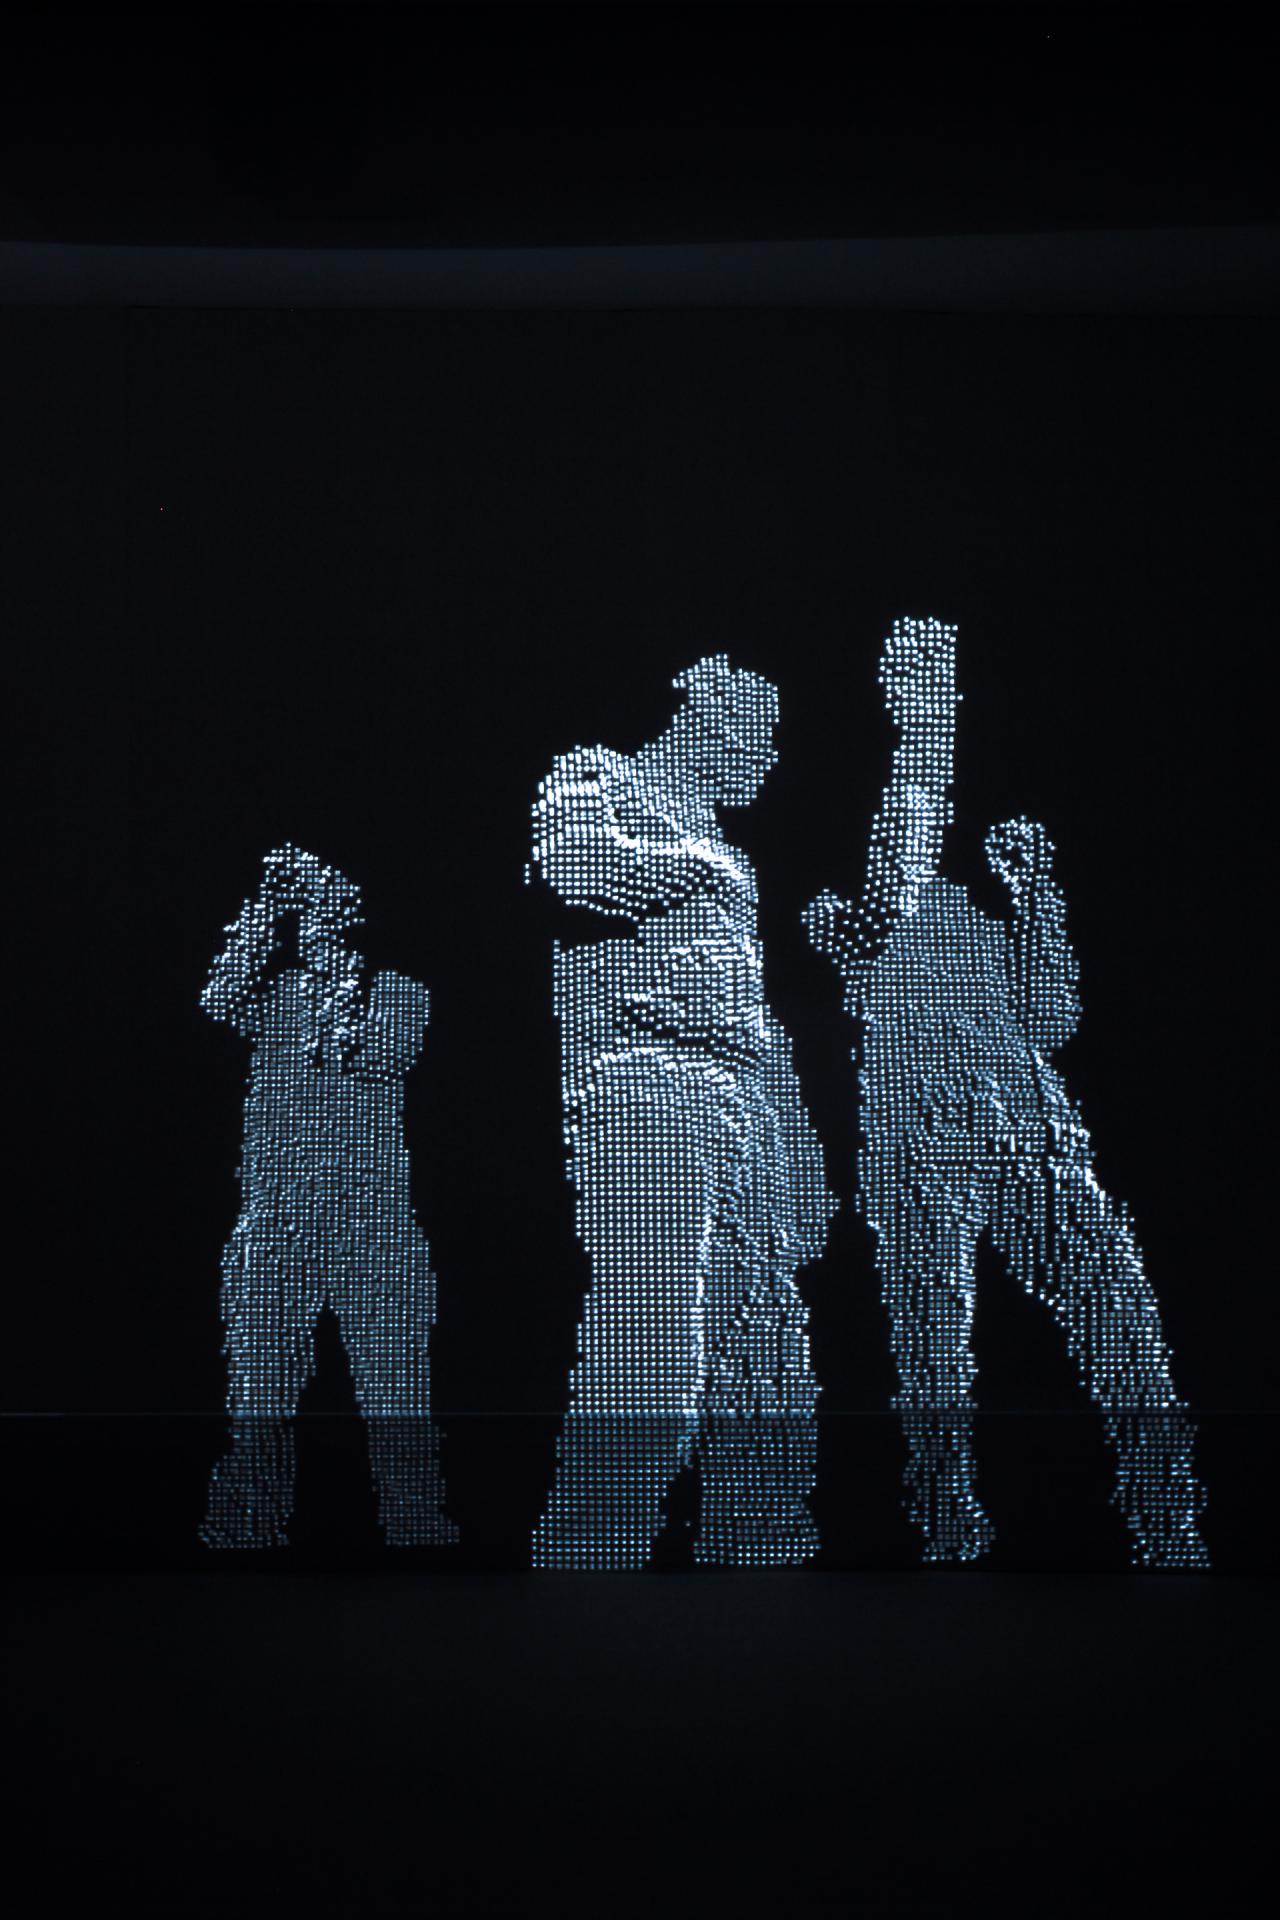 Human Figures made of silver pixels